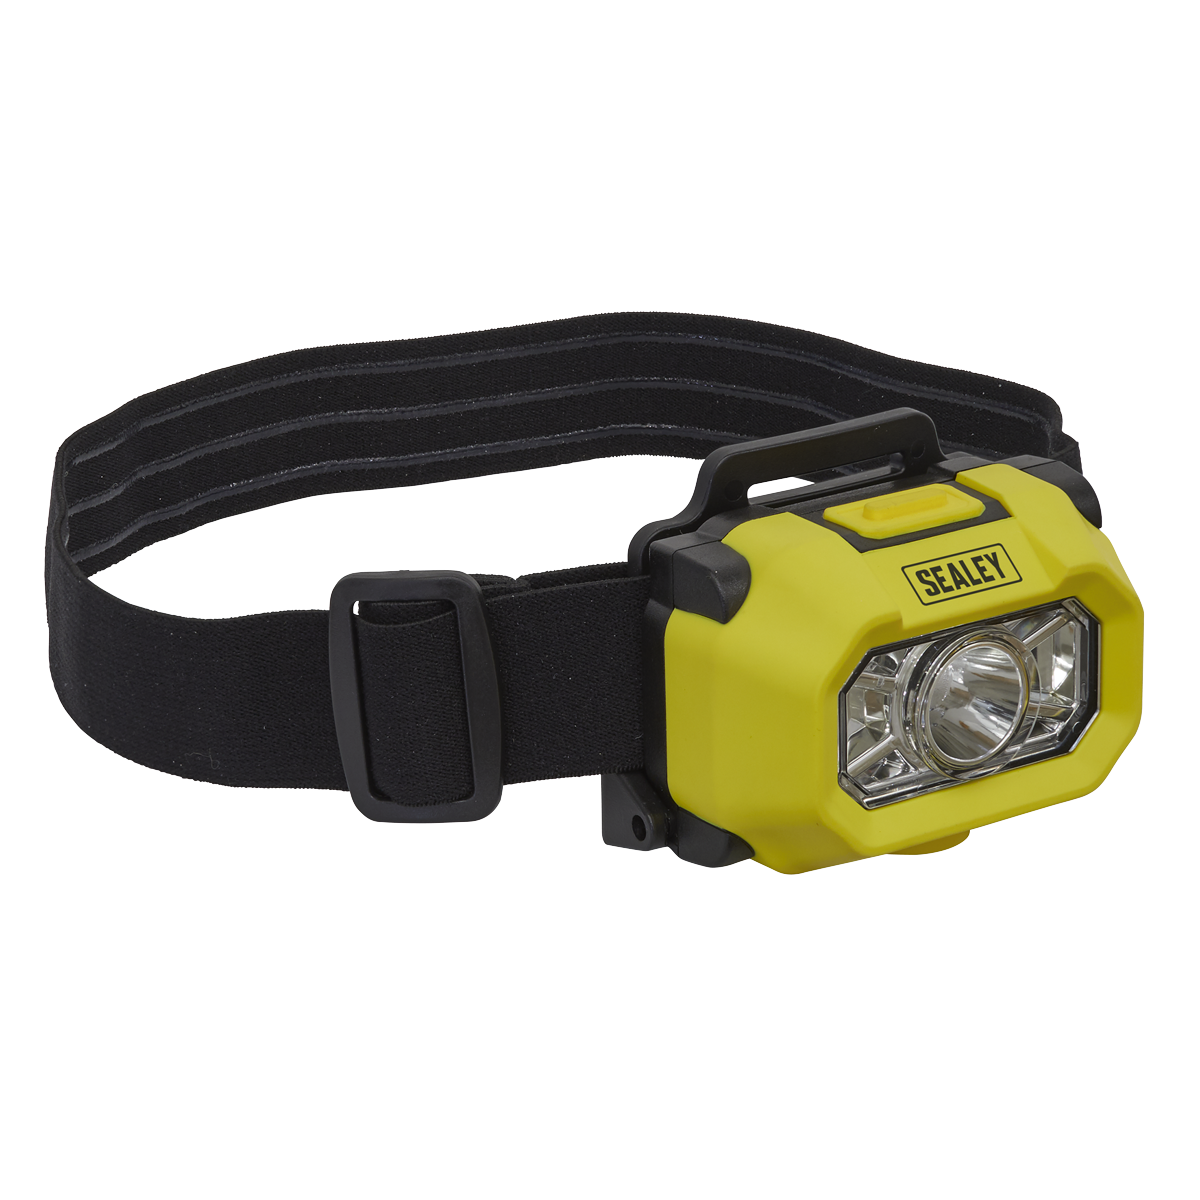 Head Torch 1.8W SMD LED Intrinsically Safe ATEX/IECEx Approved - HT452IS - Farming Parts